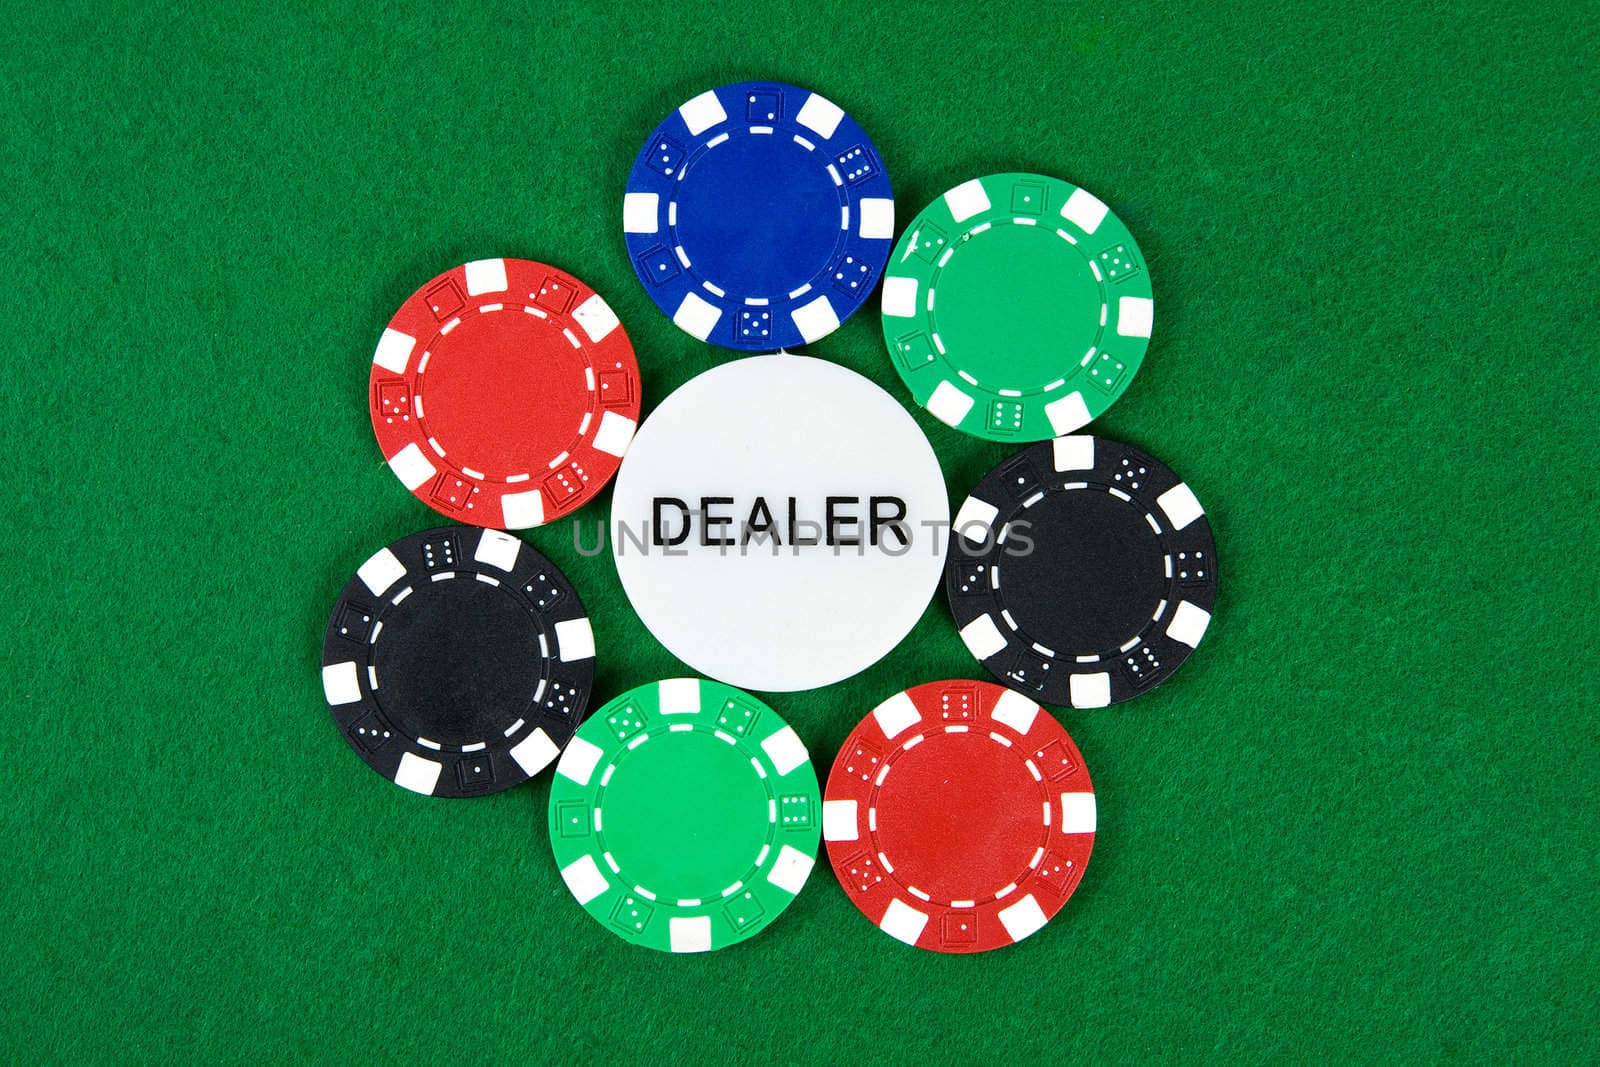 Poker chips arranged in a circle with dealer chip in the middle